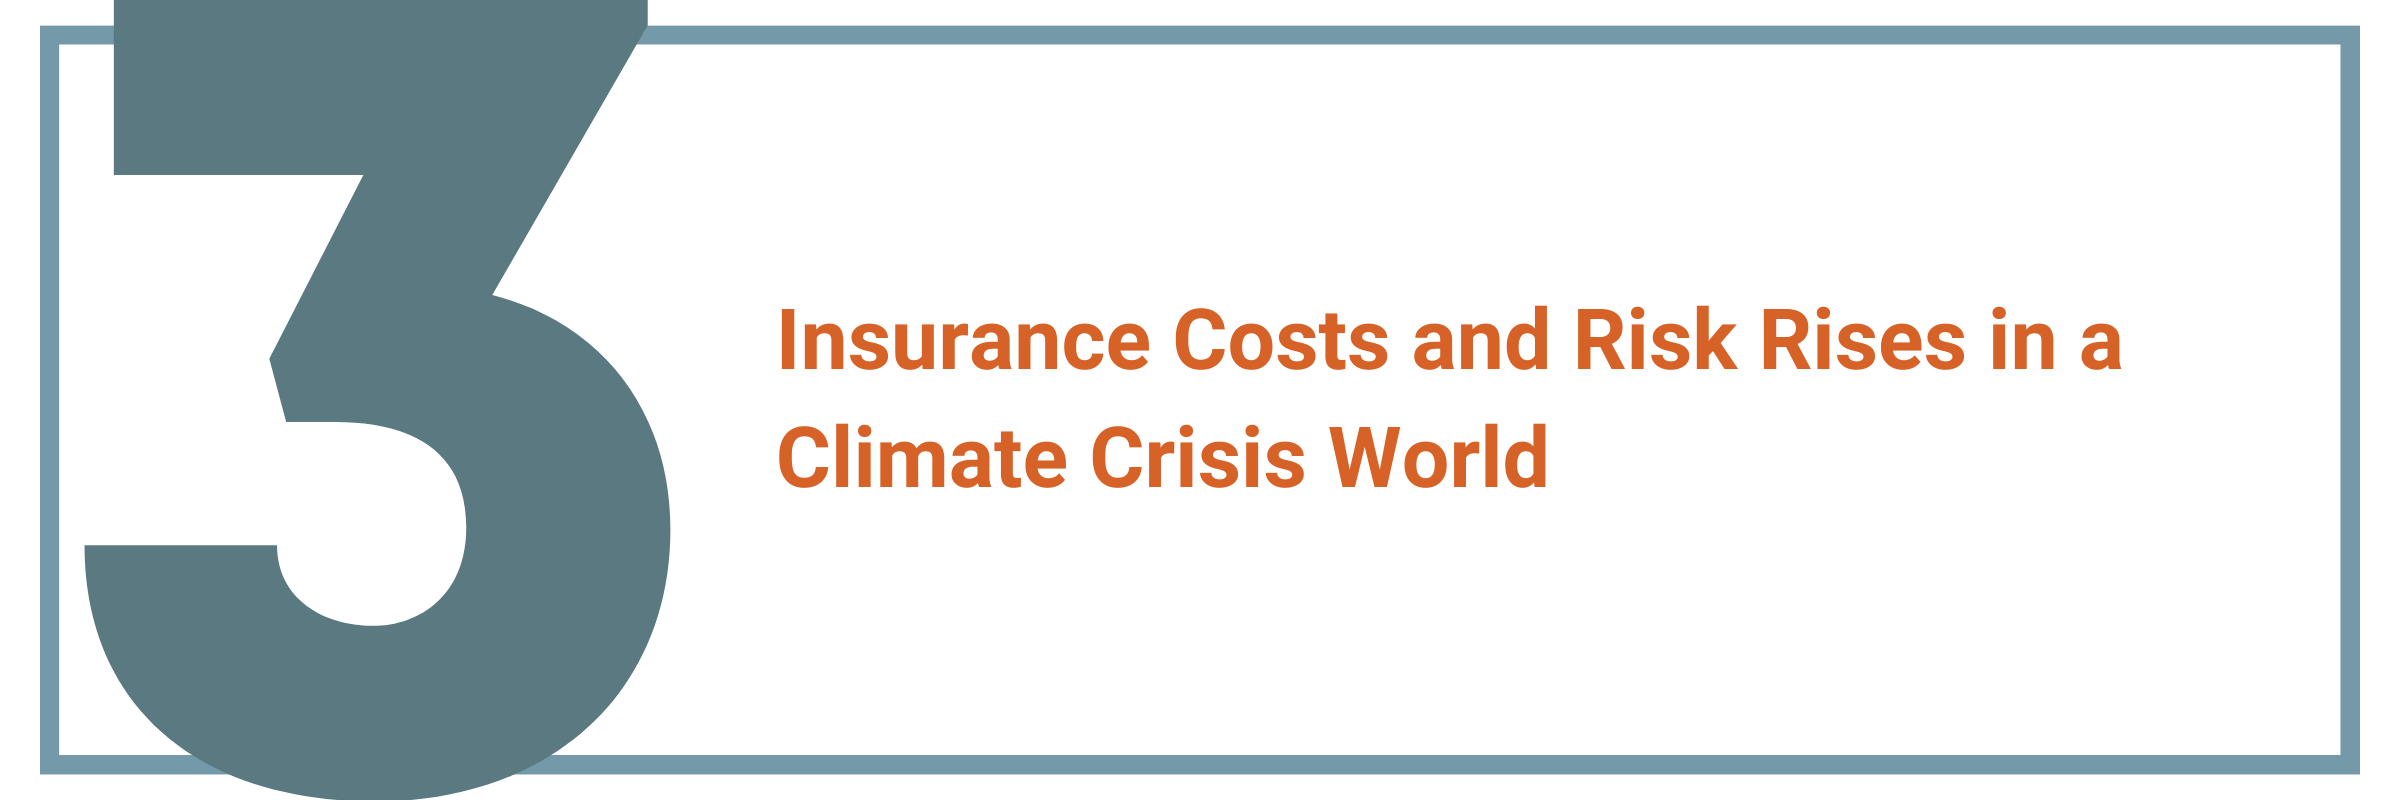 Insurance Costs and Risk Rises in a Climate Crisis World 